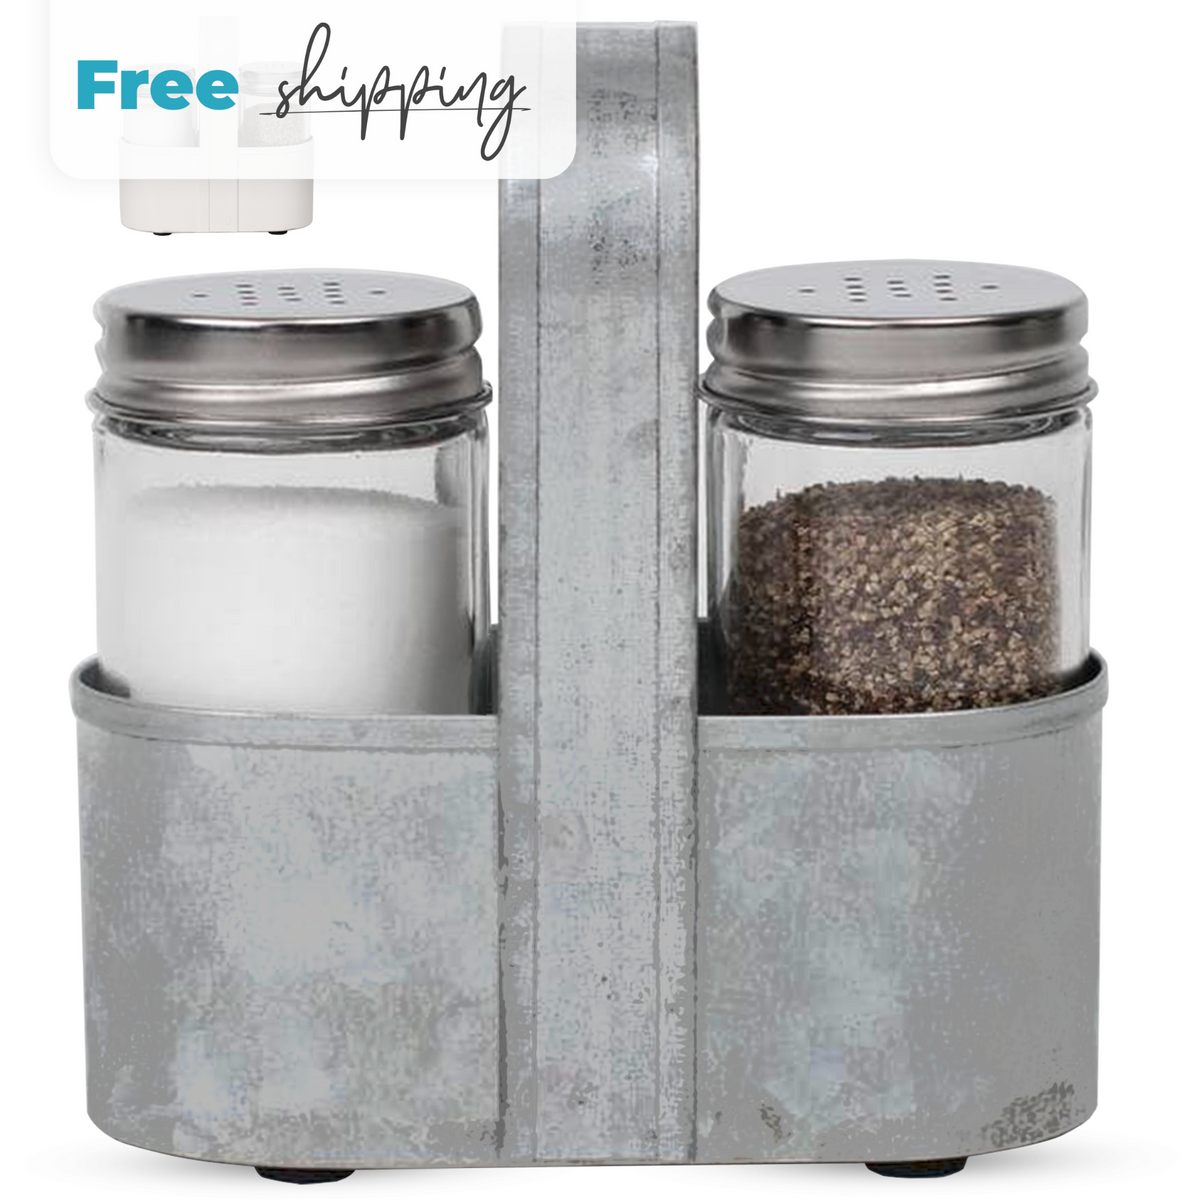 Farmhouse Salt and Pepper Shakers with Caddy Set by Saratoga Home - Rustic Vinta